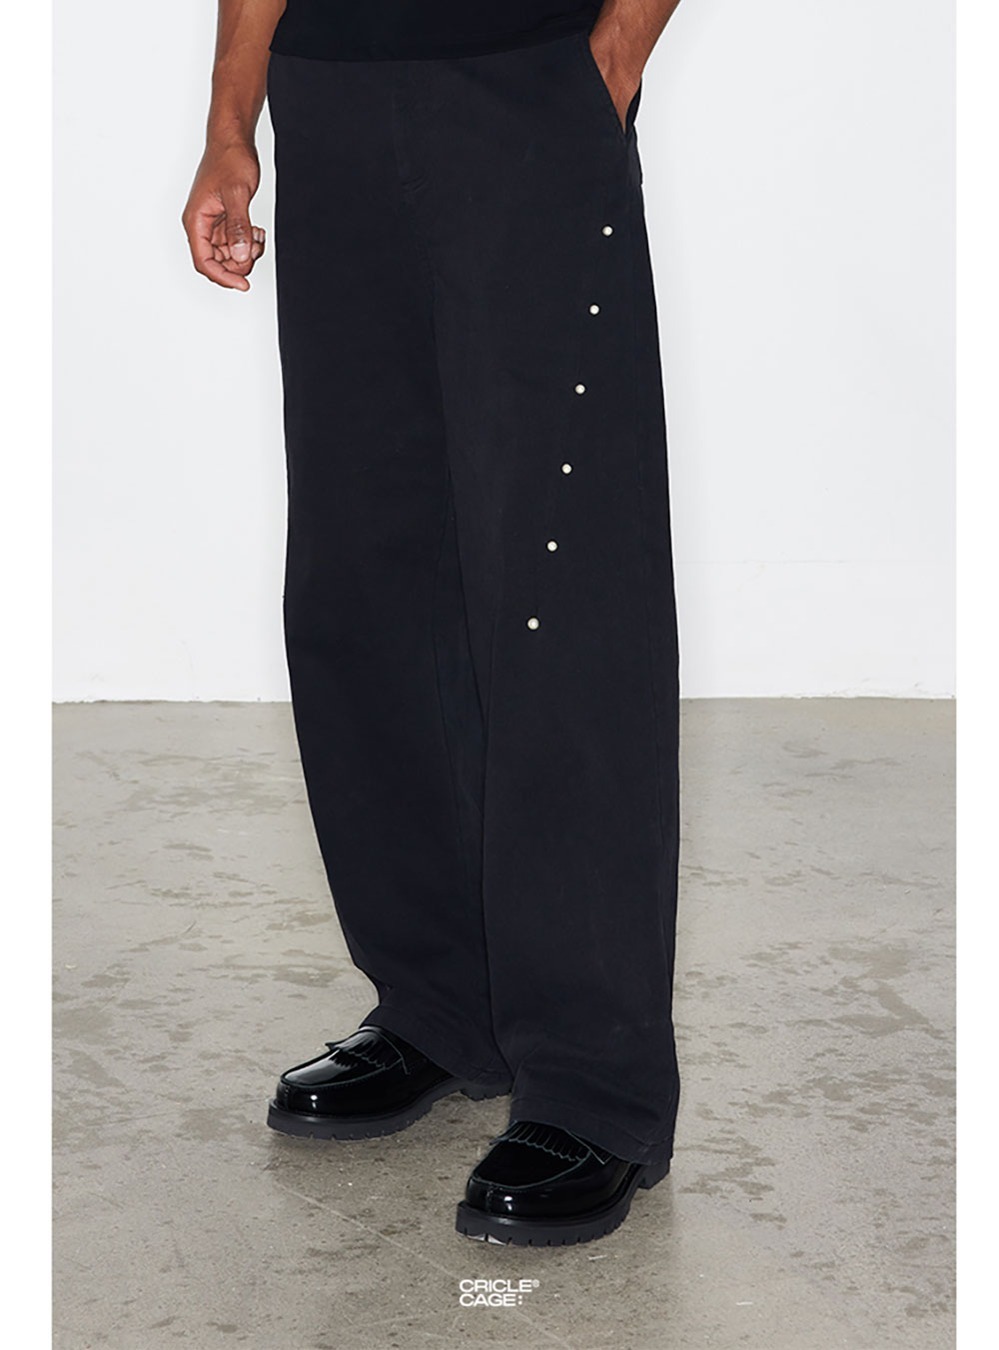 [CRICLE CAGE] Pearl Stitch Straight Pants (2 colors)